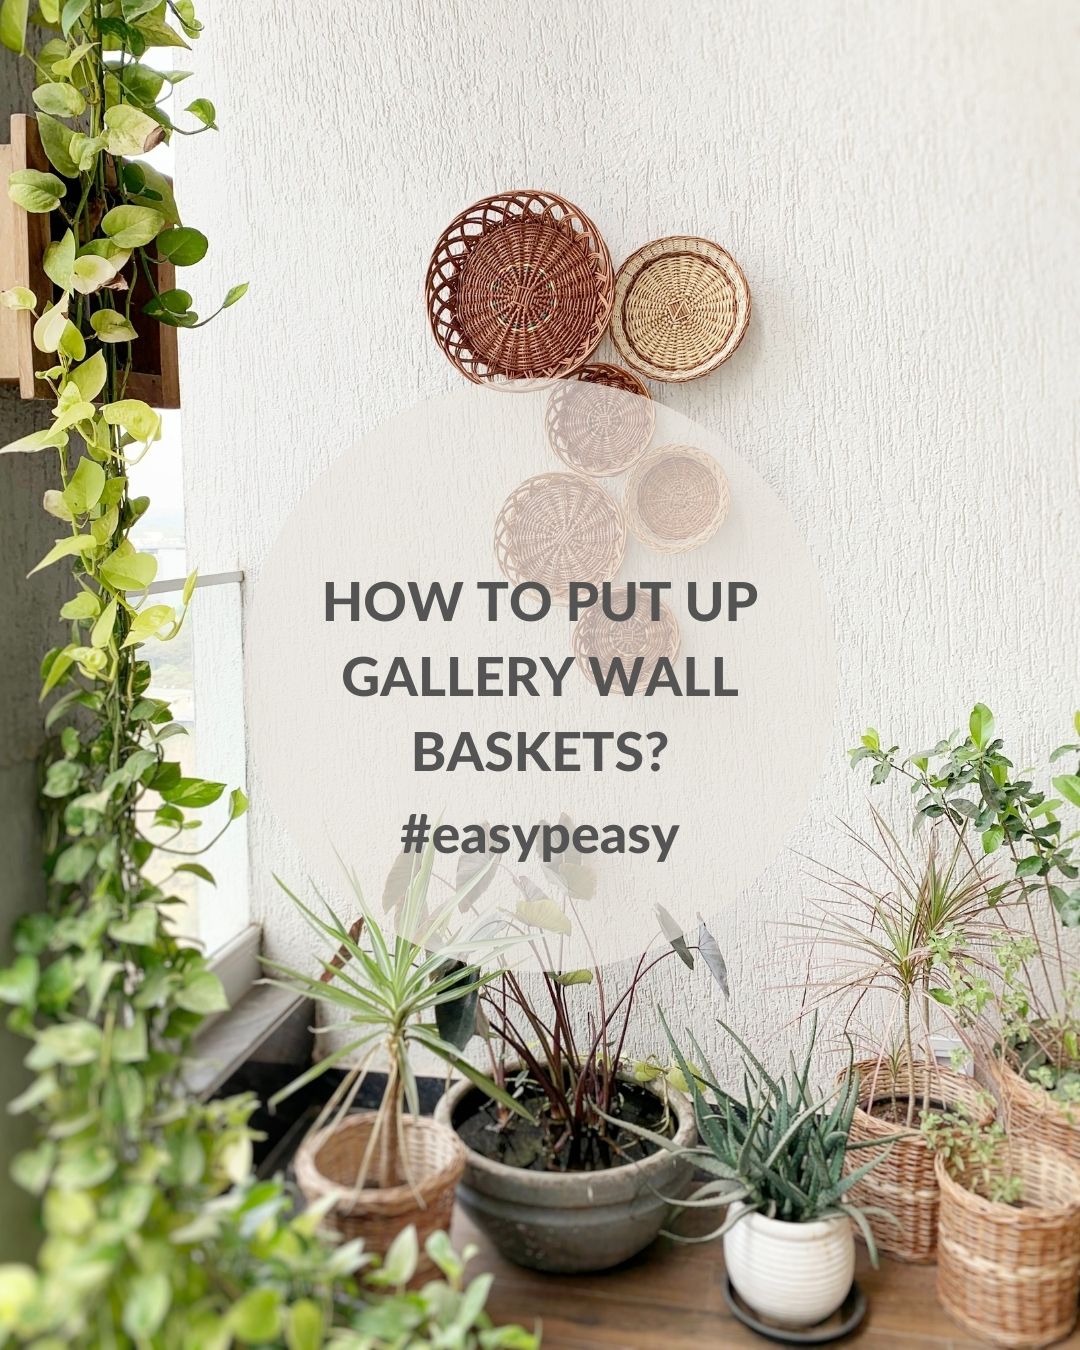 How to put up Gallery Wall Baskets?